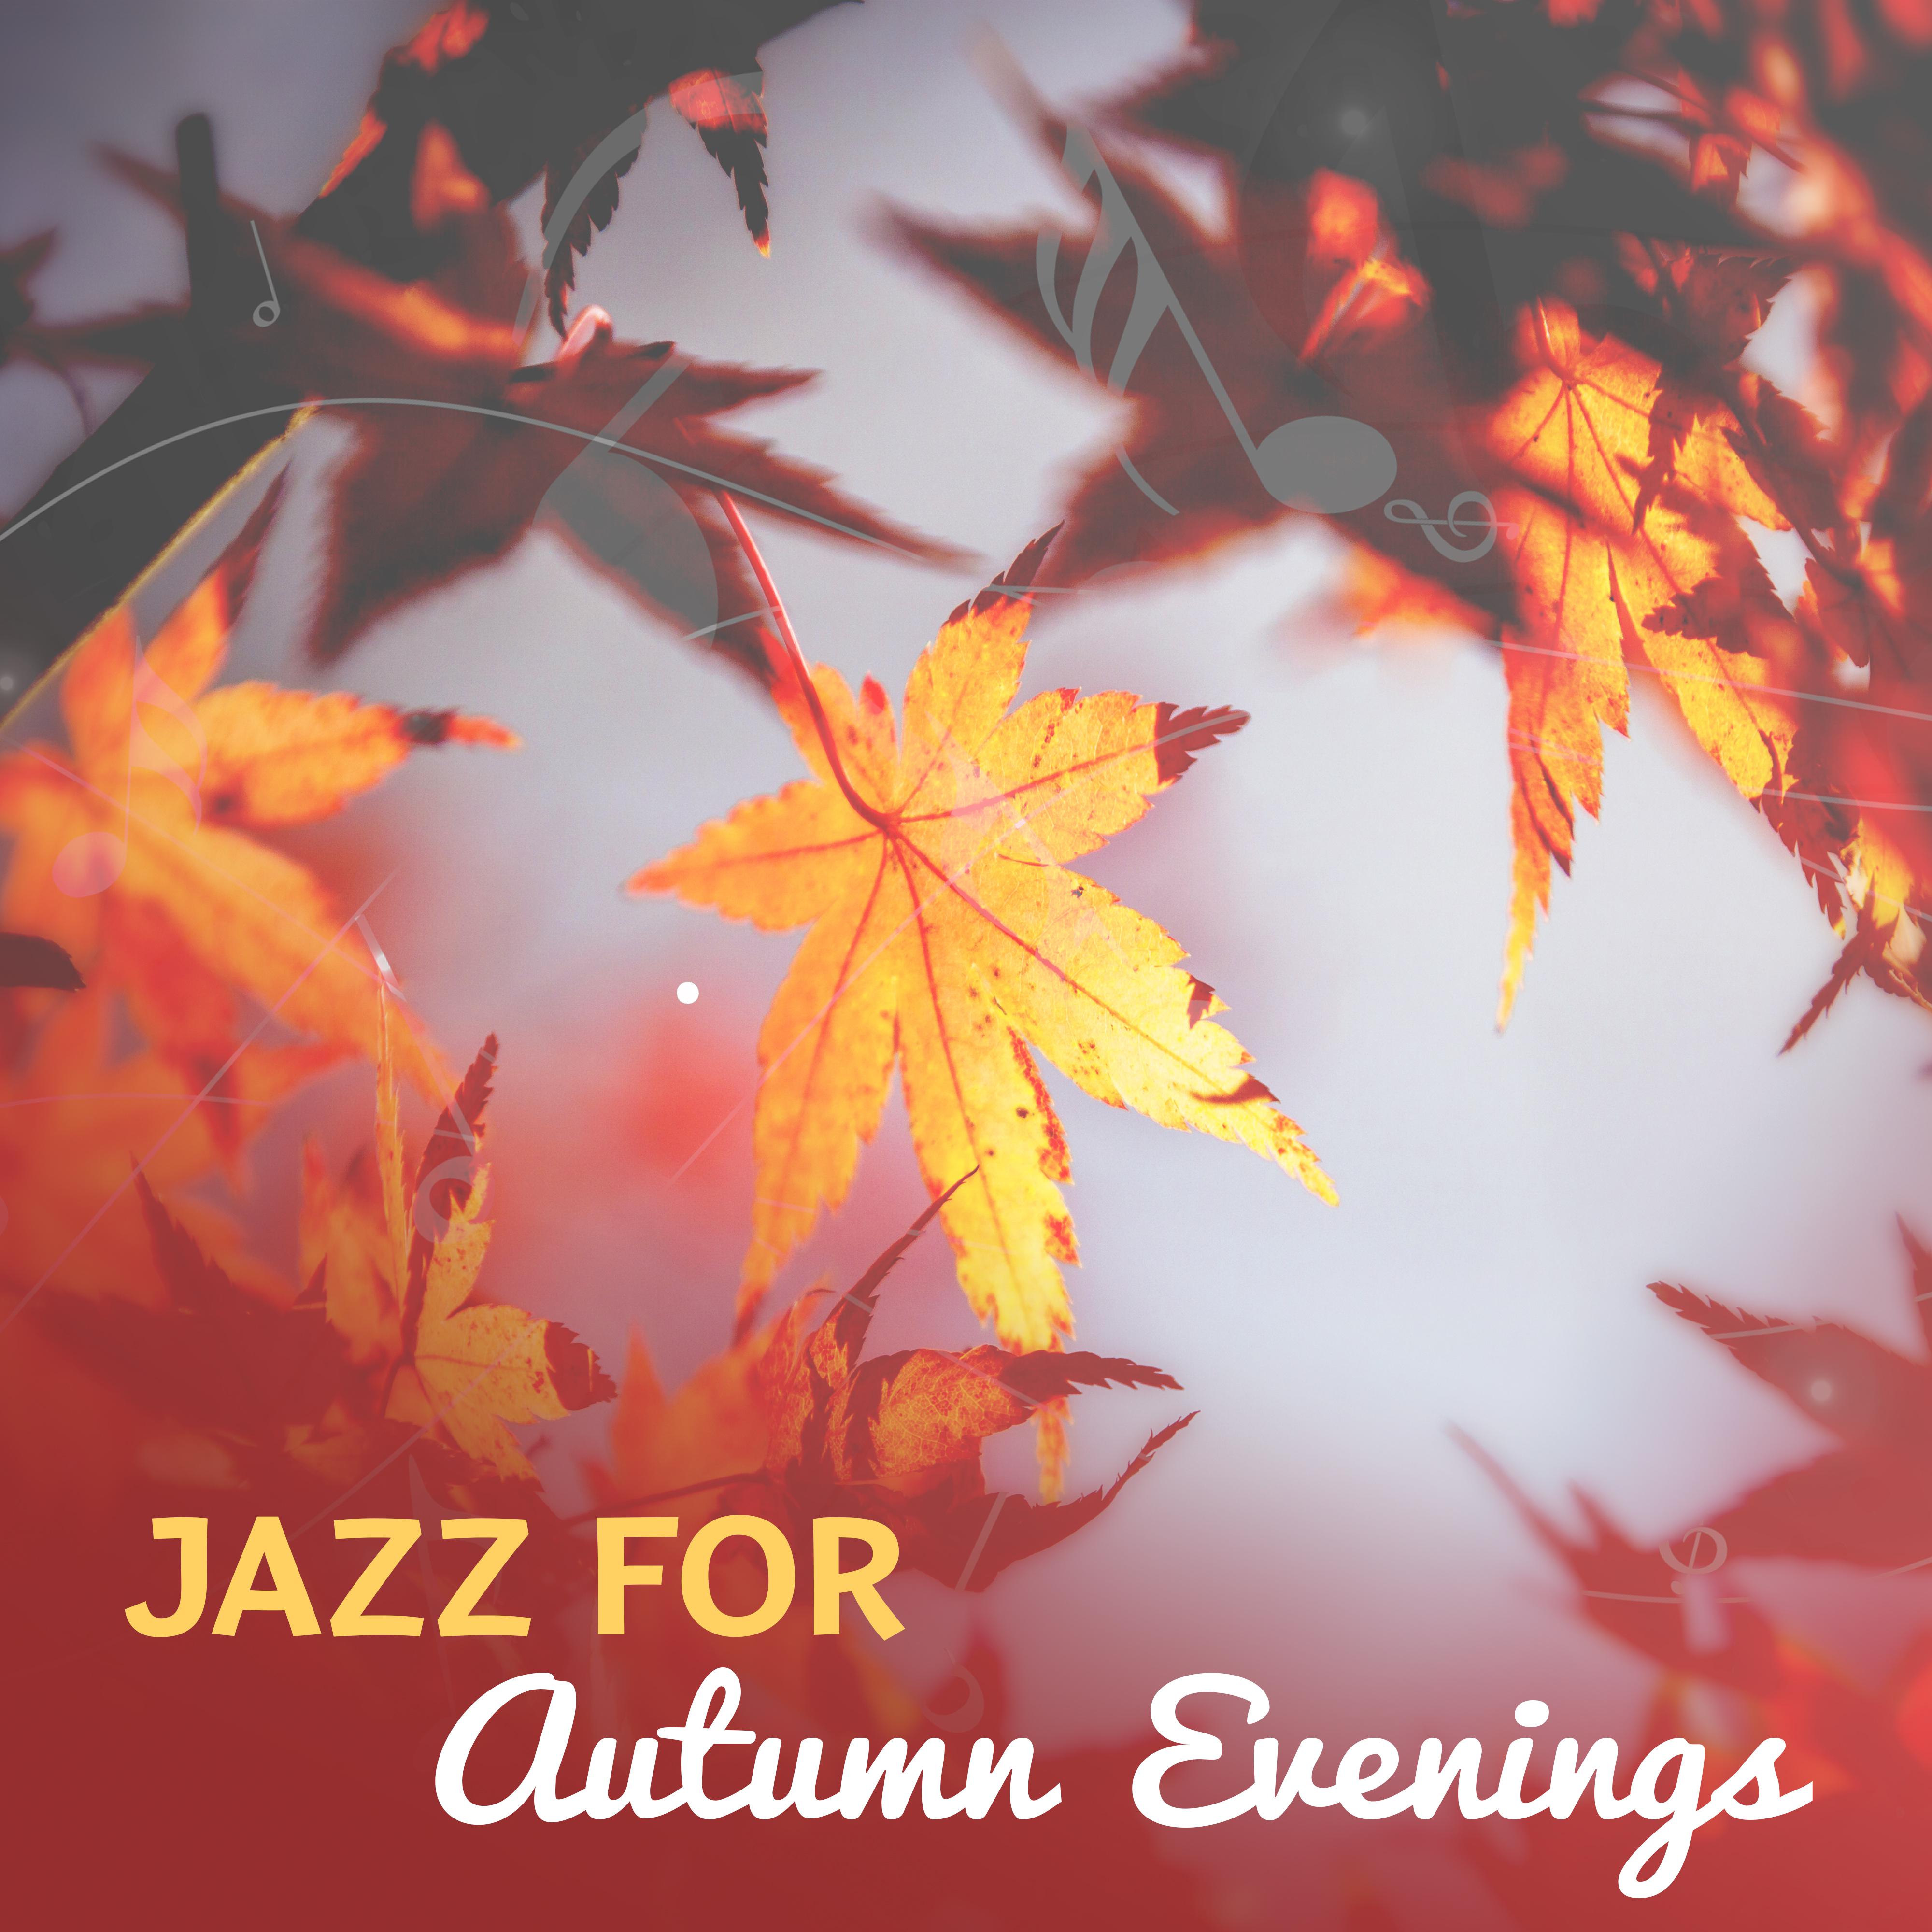 Jazz for Autumn Evenings – Ambient Jazz Music, Romantic Jazz, Essential Melodies, **** Piano Sounds